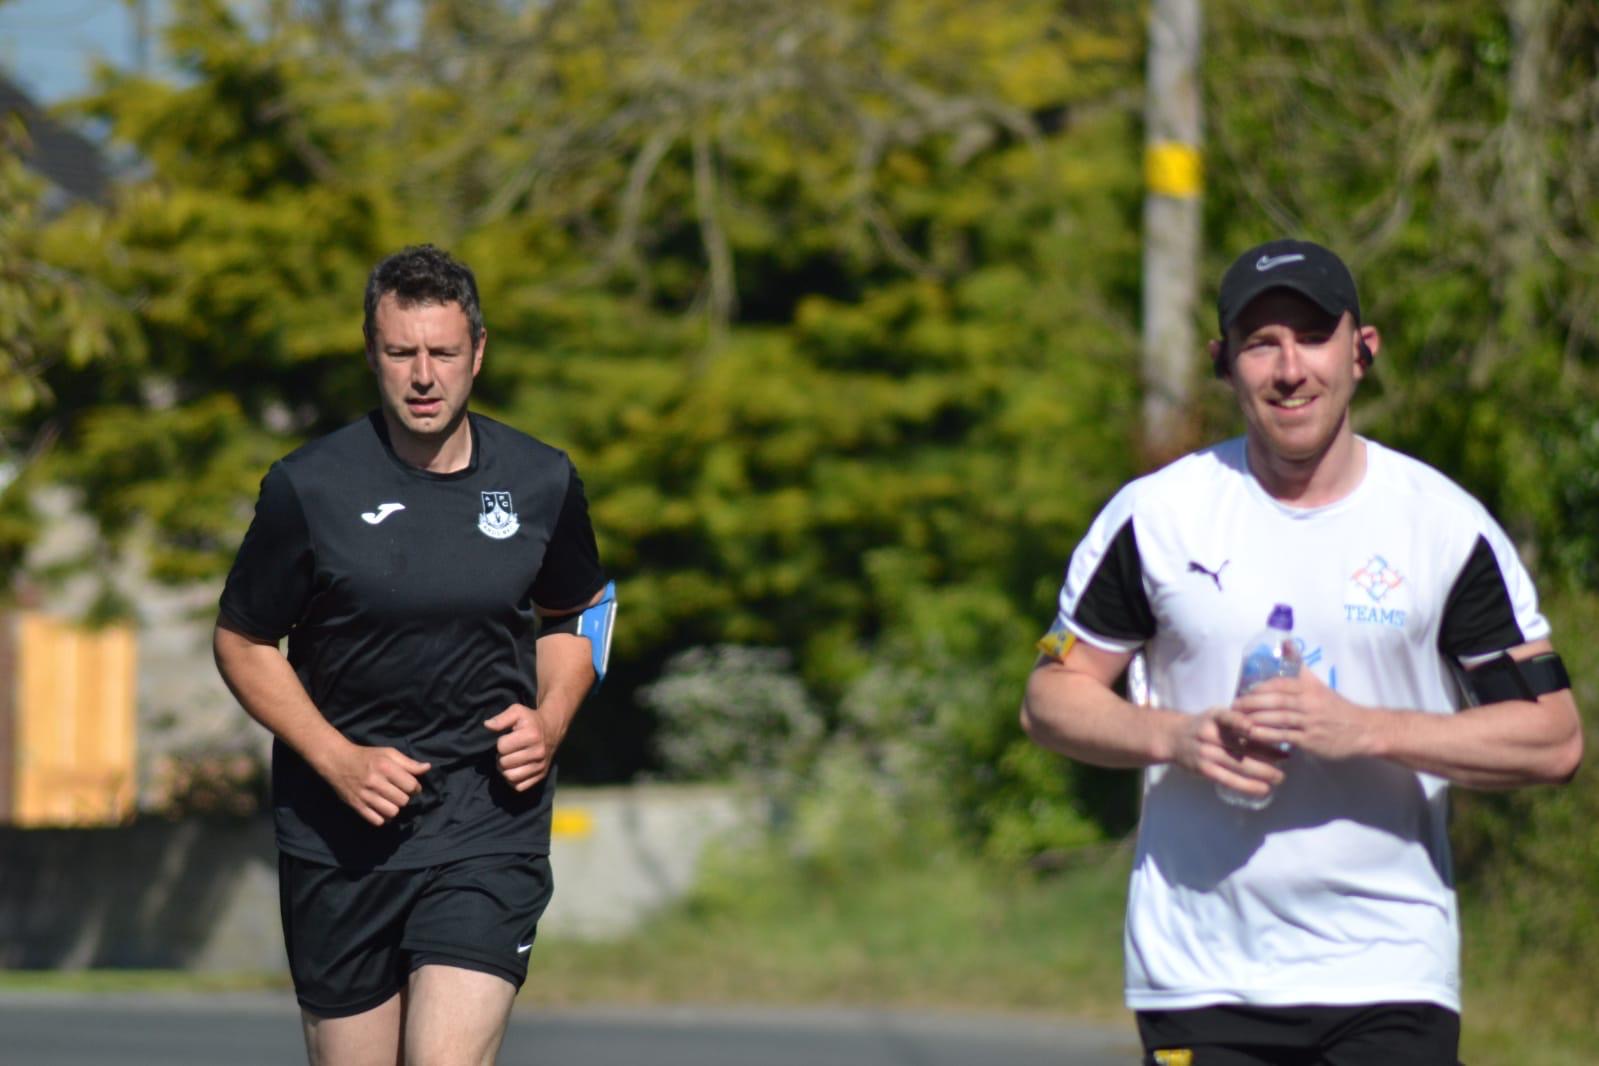 Ballycran’s Chris Egan solo runs without a stick in aid of Mental Health Charities – Update 2